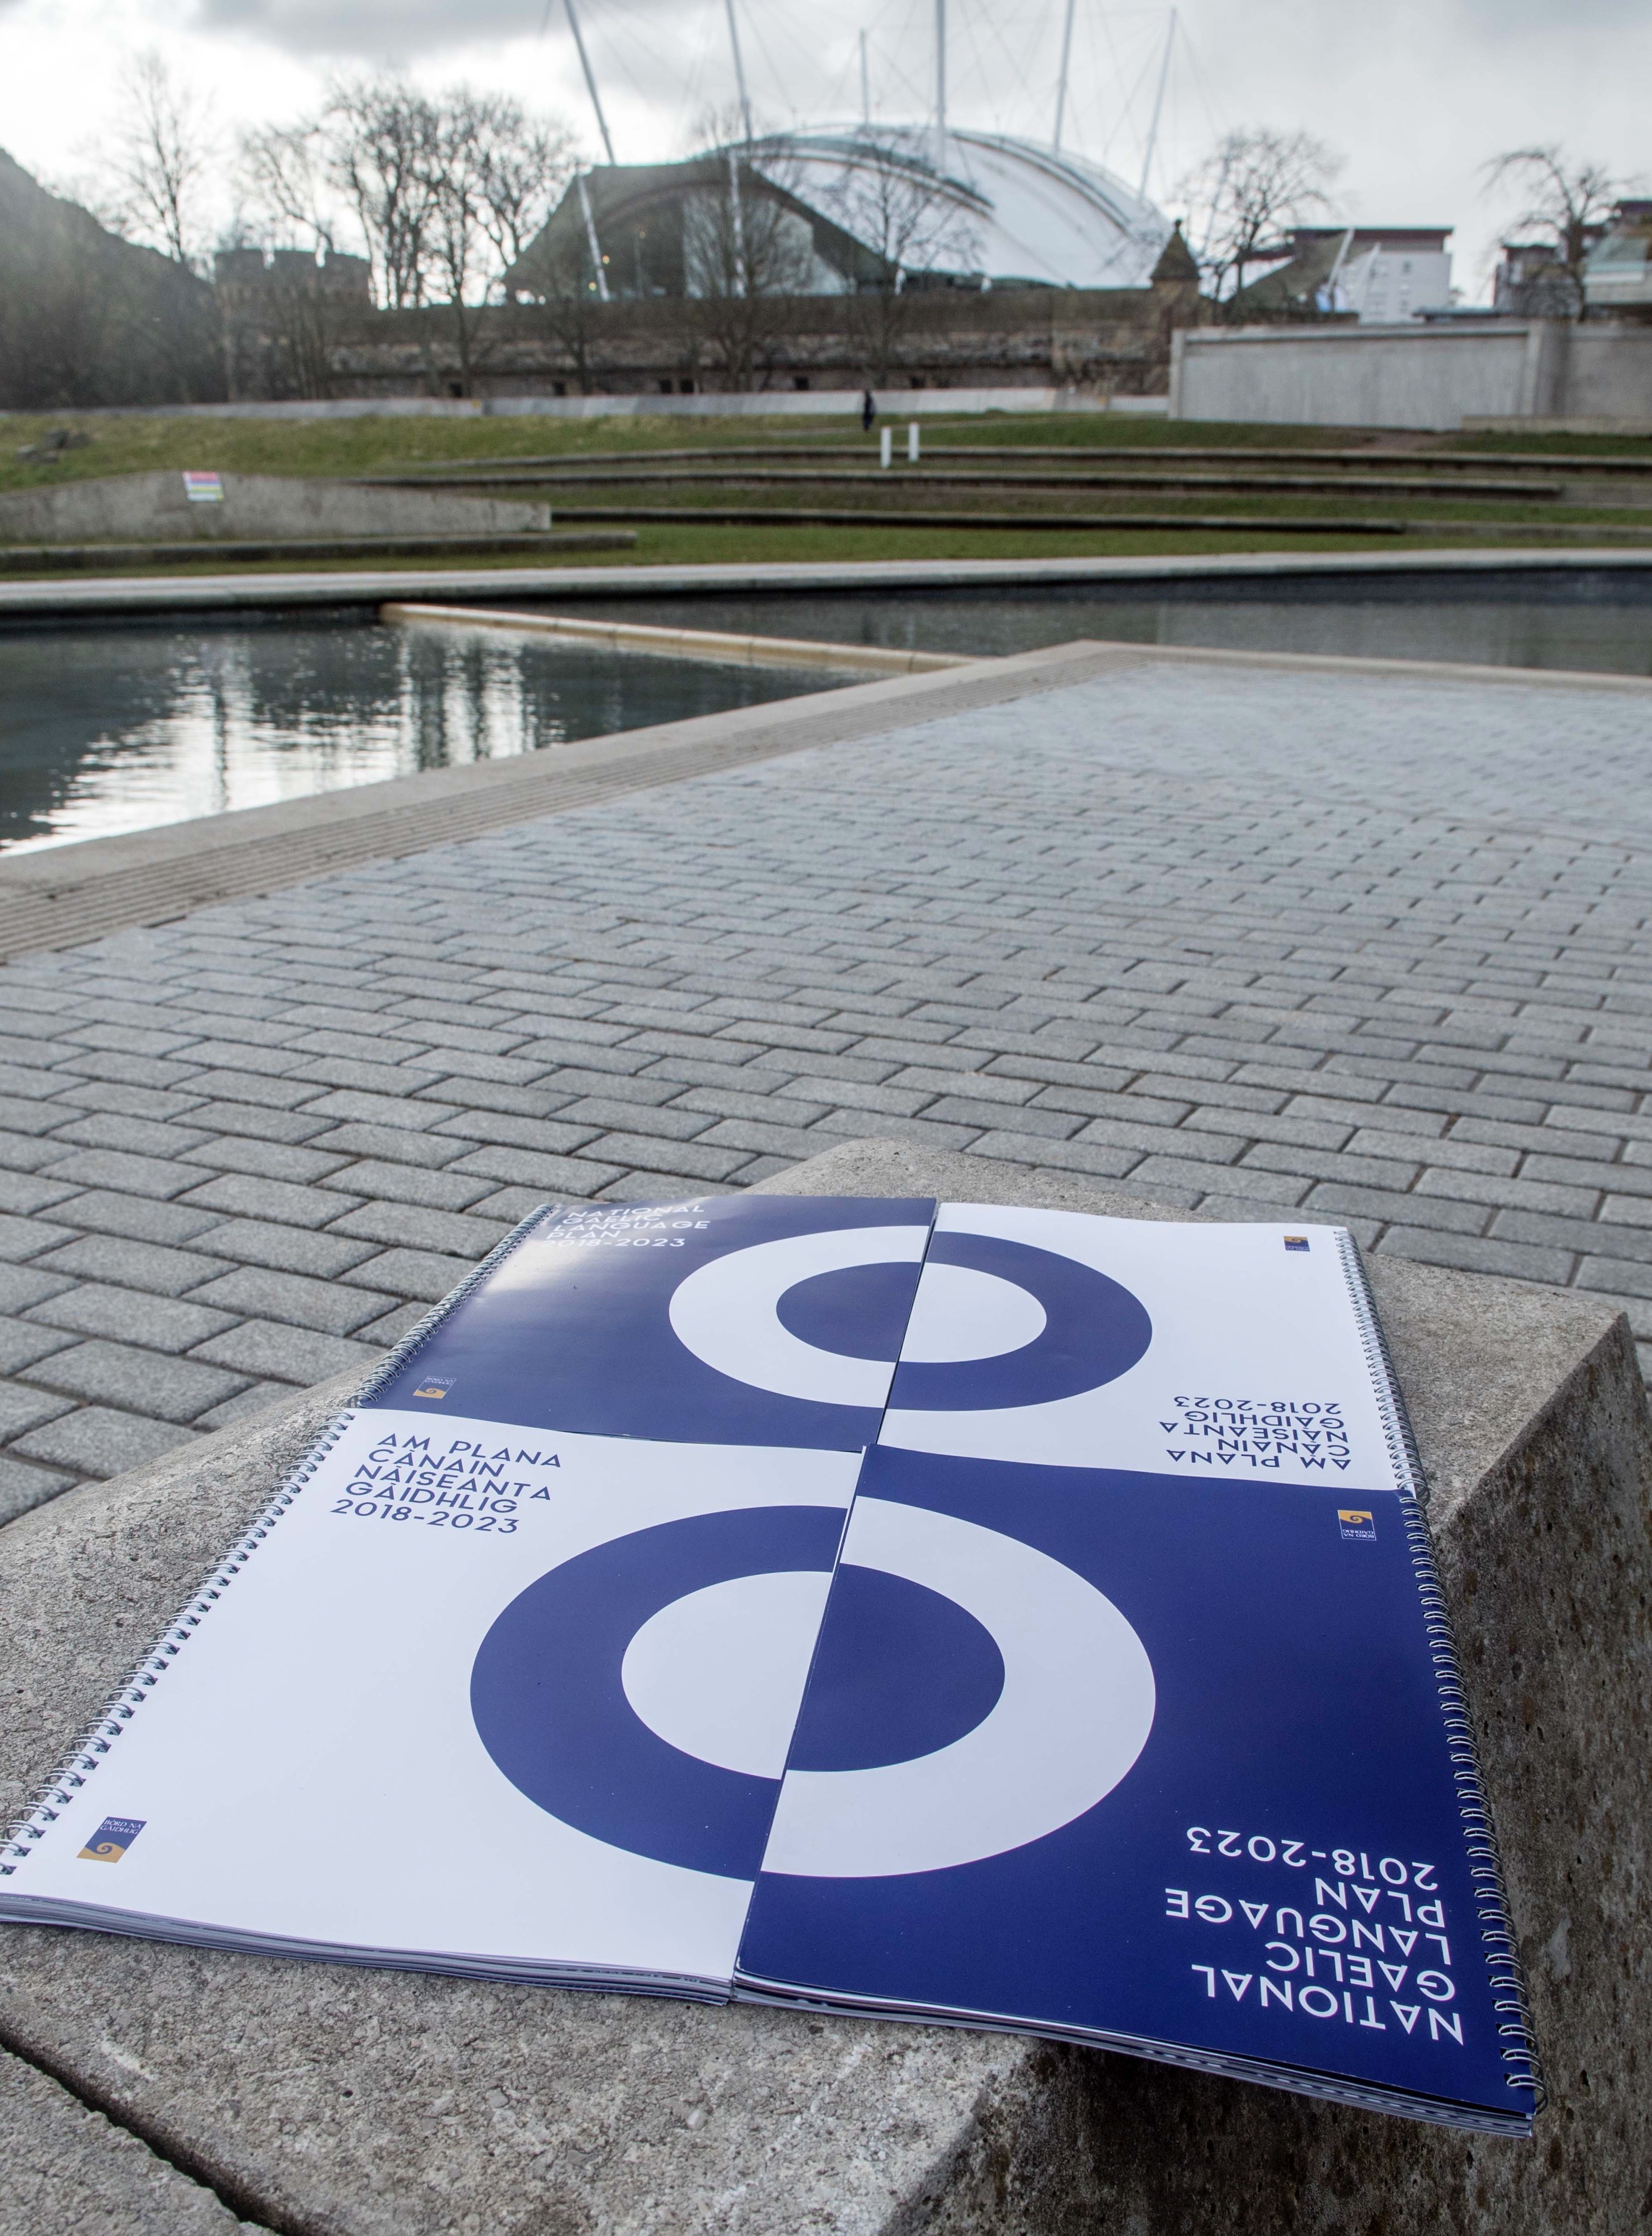 Picture: A copy of the National Gaelic Language Plan 2018-2023 on a bollard outside the Scottish Parliament